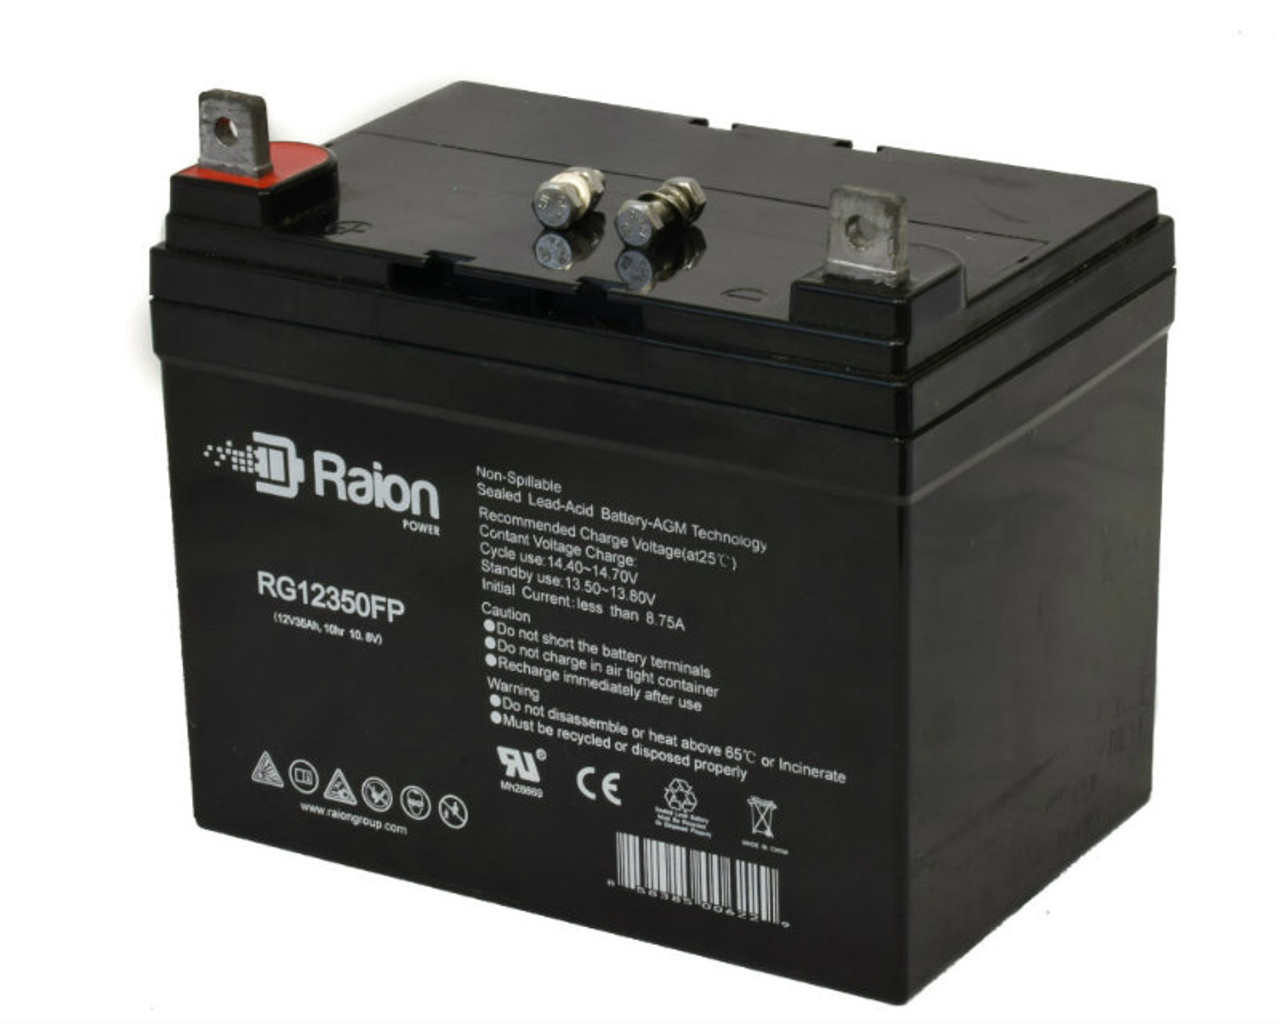 Raion Power Replacement 12V 35Ah Battery for Toro 415 HYDRO - 1 Pack